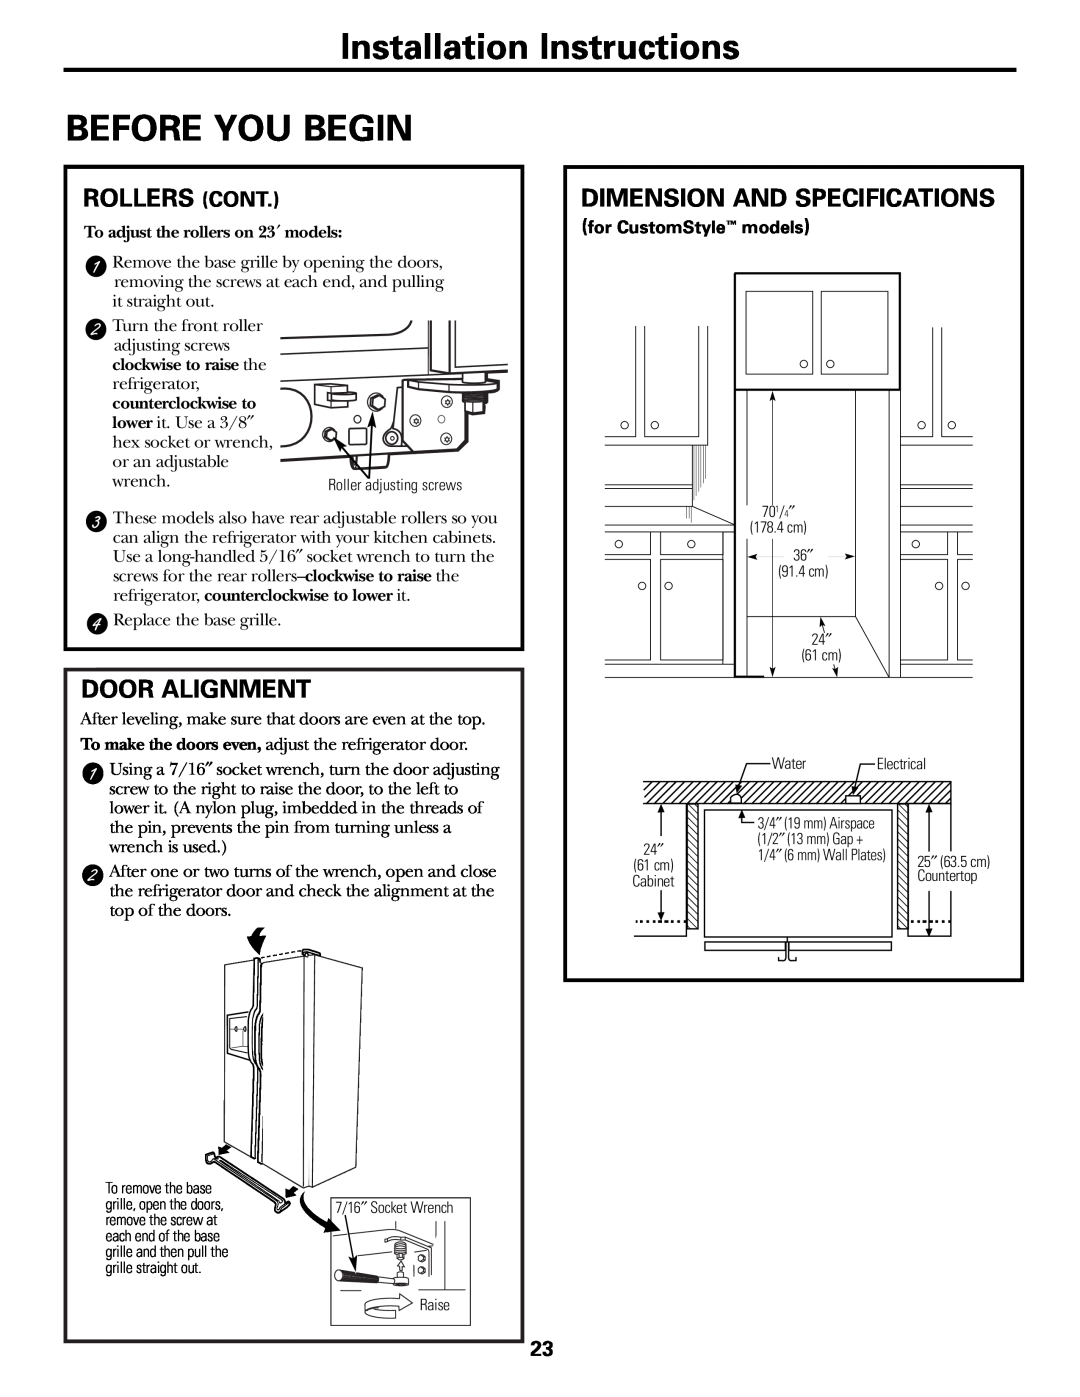 GE 200D2600P015 Installation Instructions BEFORE YOU BEGIN, Rollers Cont, Door Alignment, Dimension And Specifications 